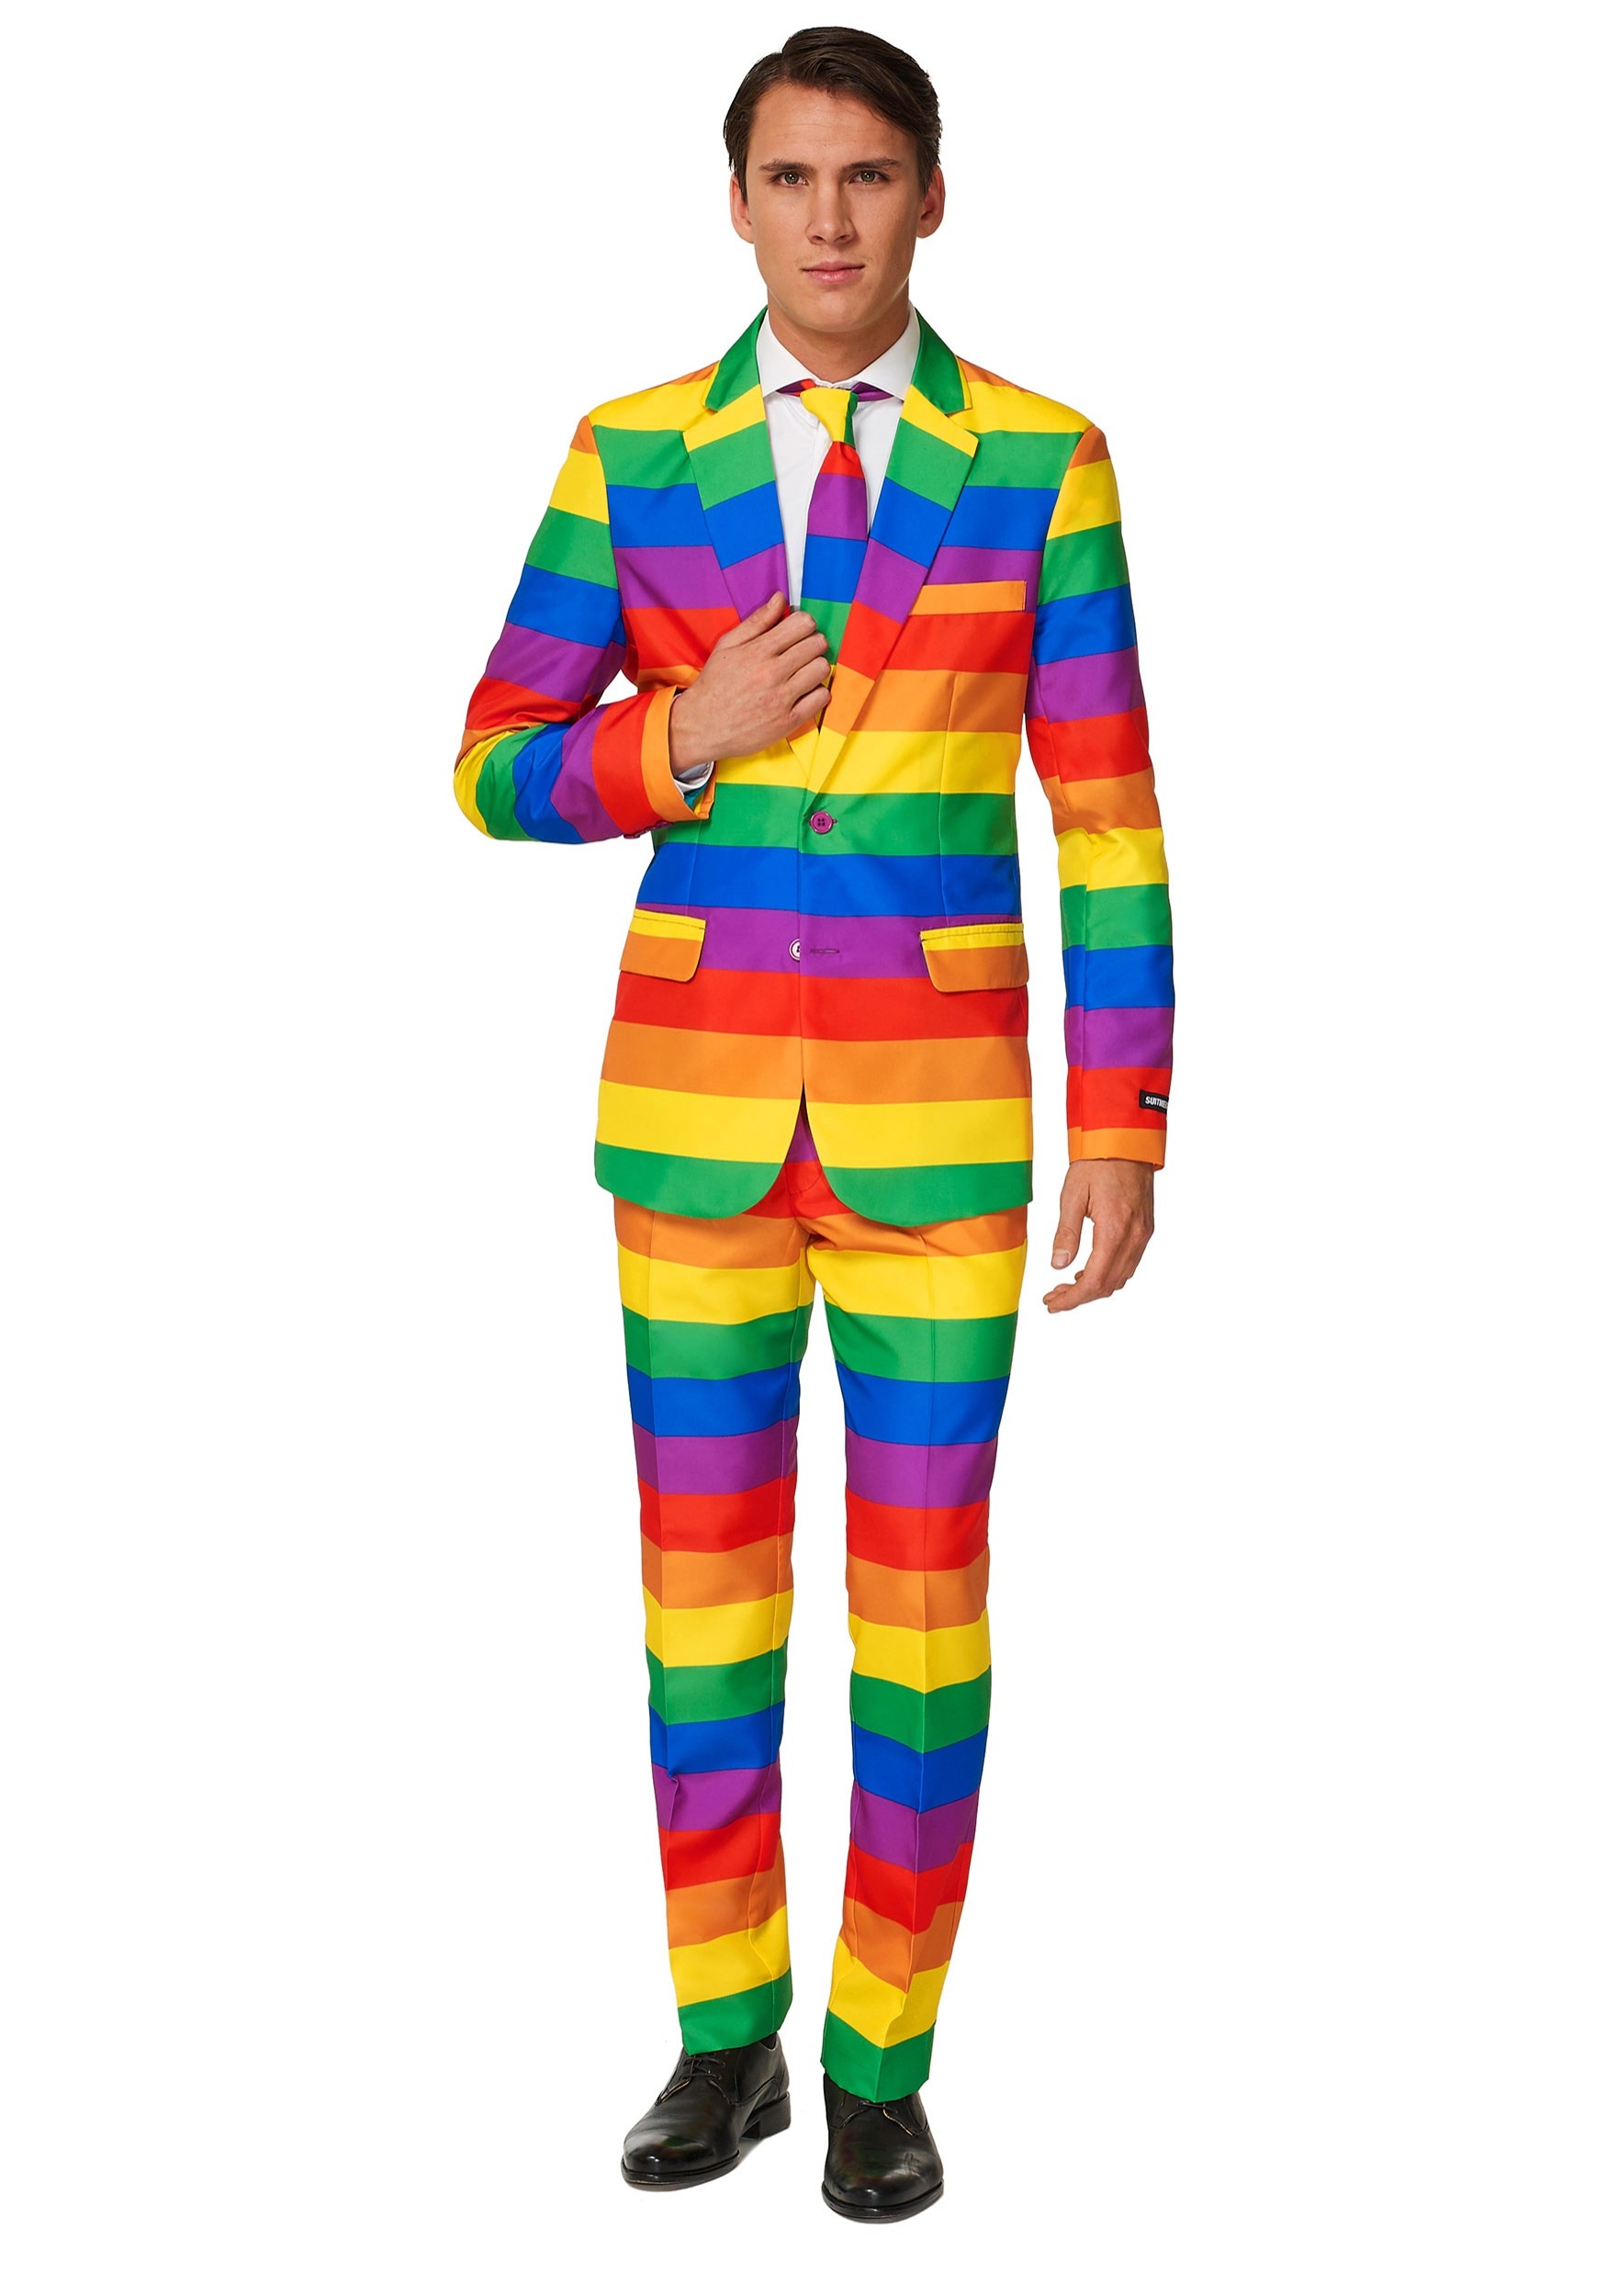 Image of Men's Rainbow Suitmeister Suit Costume ID OSOBAS0039-XL